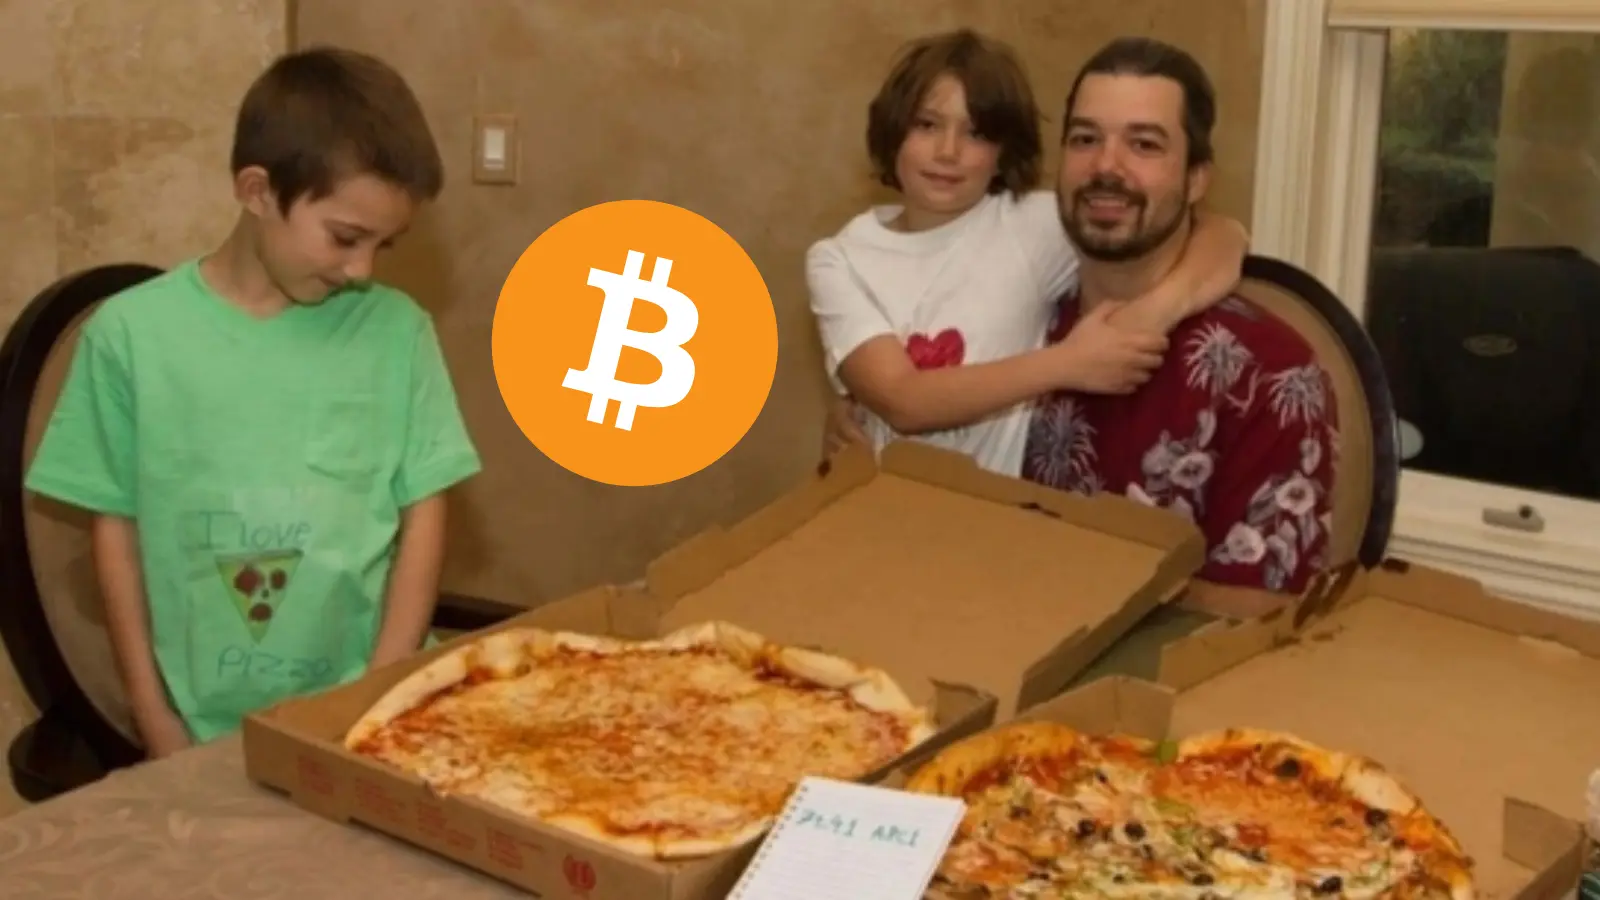 A photo representation of the Bitcoin event, Bitcoin Pizza Day: The First Commercial Bitcoin Transaction